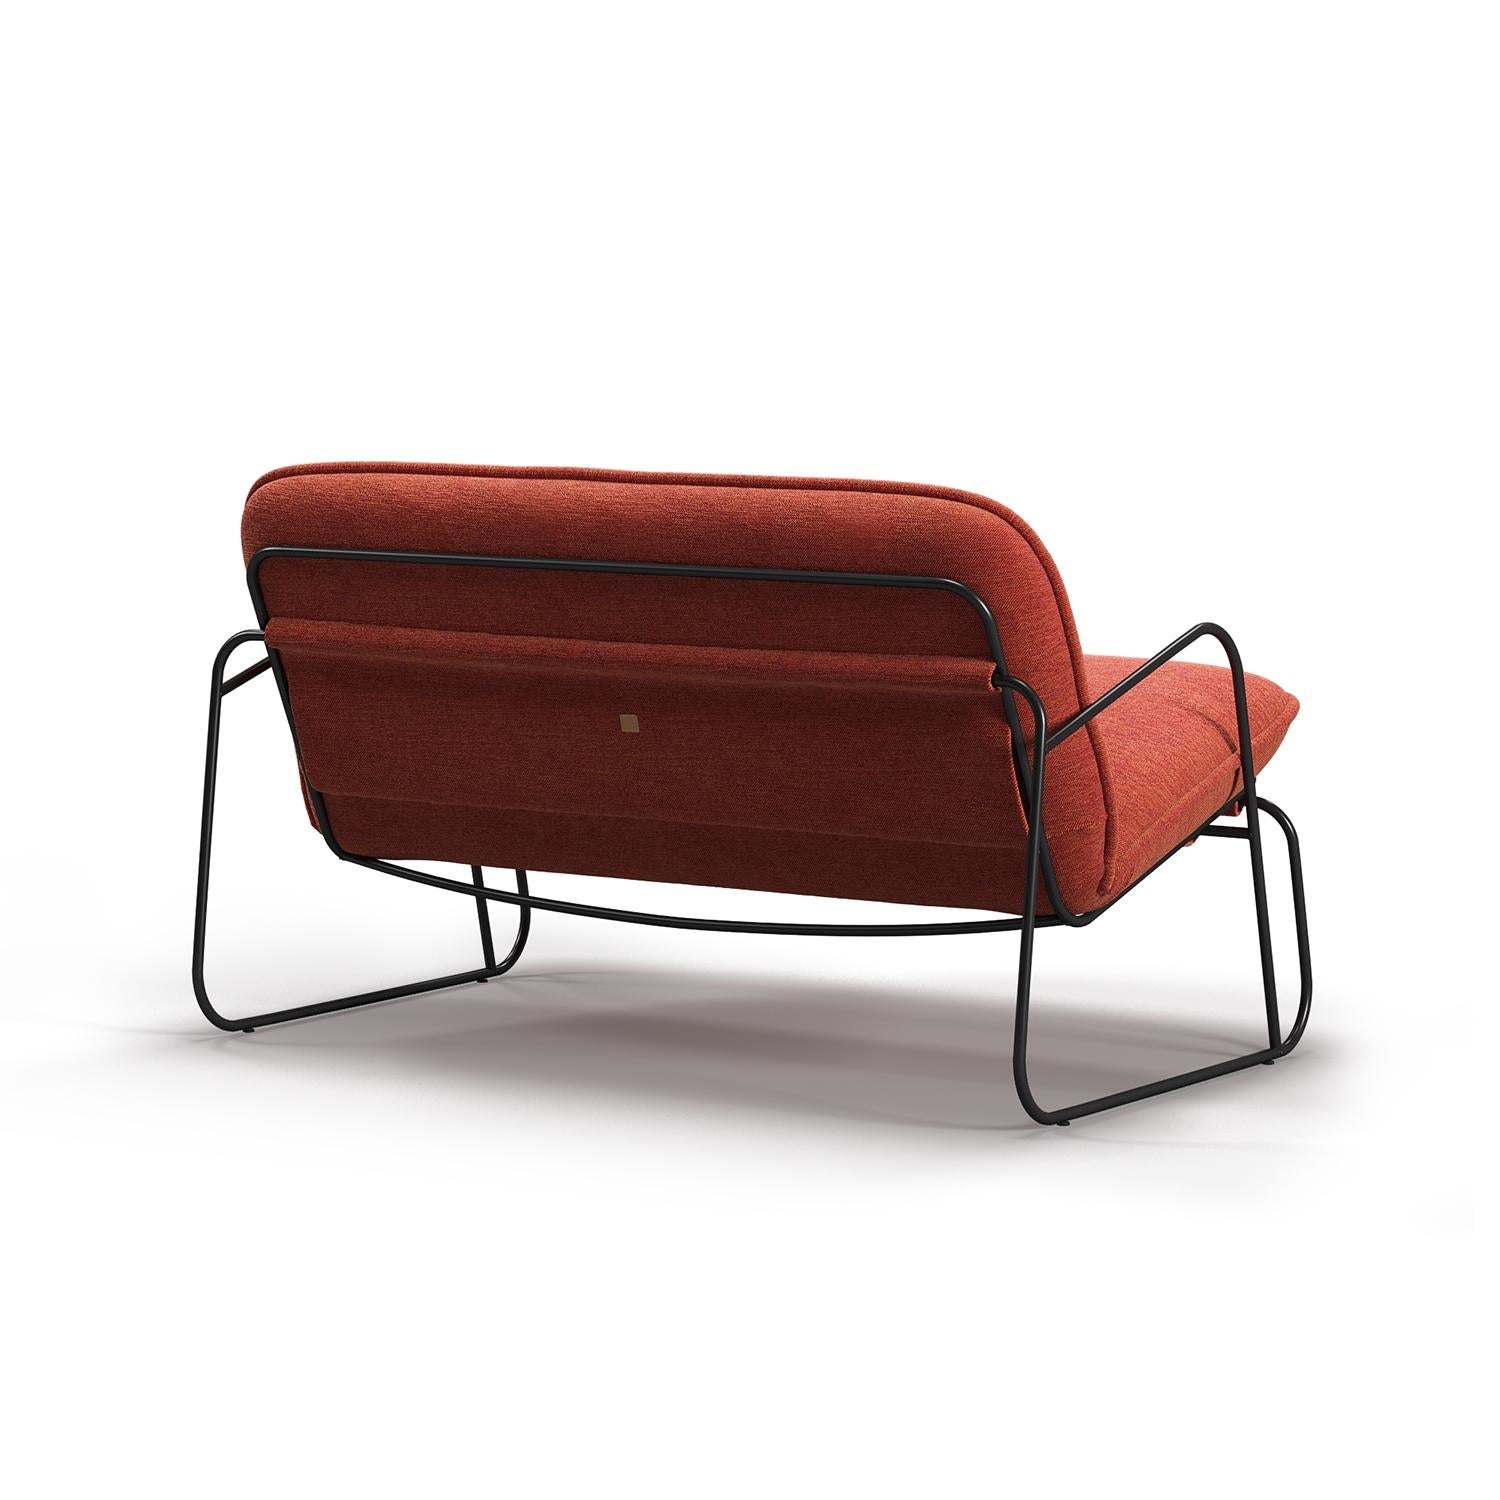 Tuttu sofa by Artu
Pavel Vetrov
Dimensions: W 134 x D 84 x H 78 cm
Materials: metal, upholstery
Other colors and materials available.

Collection Tuttu Monteur takes its name from a french word “editor”. Inspired by a person who thoughtfully